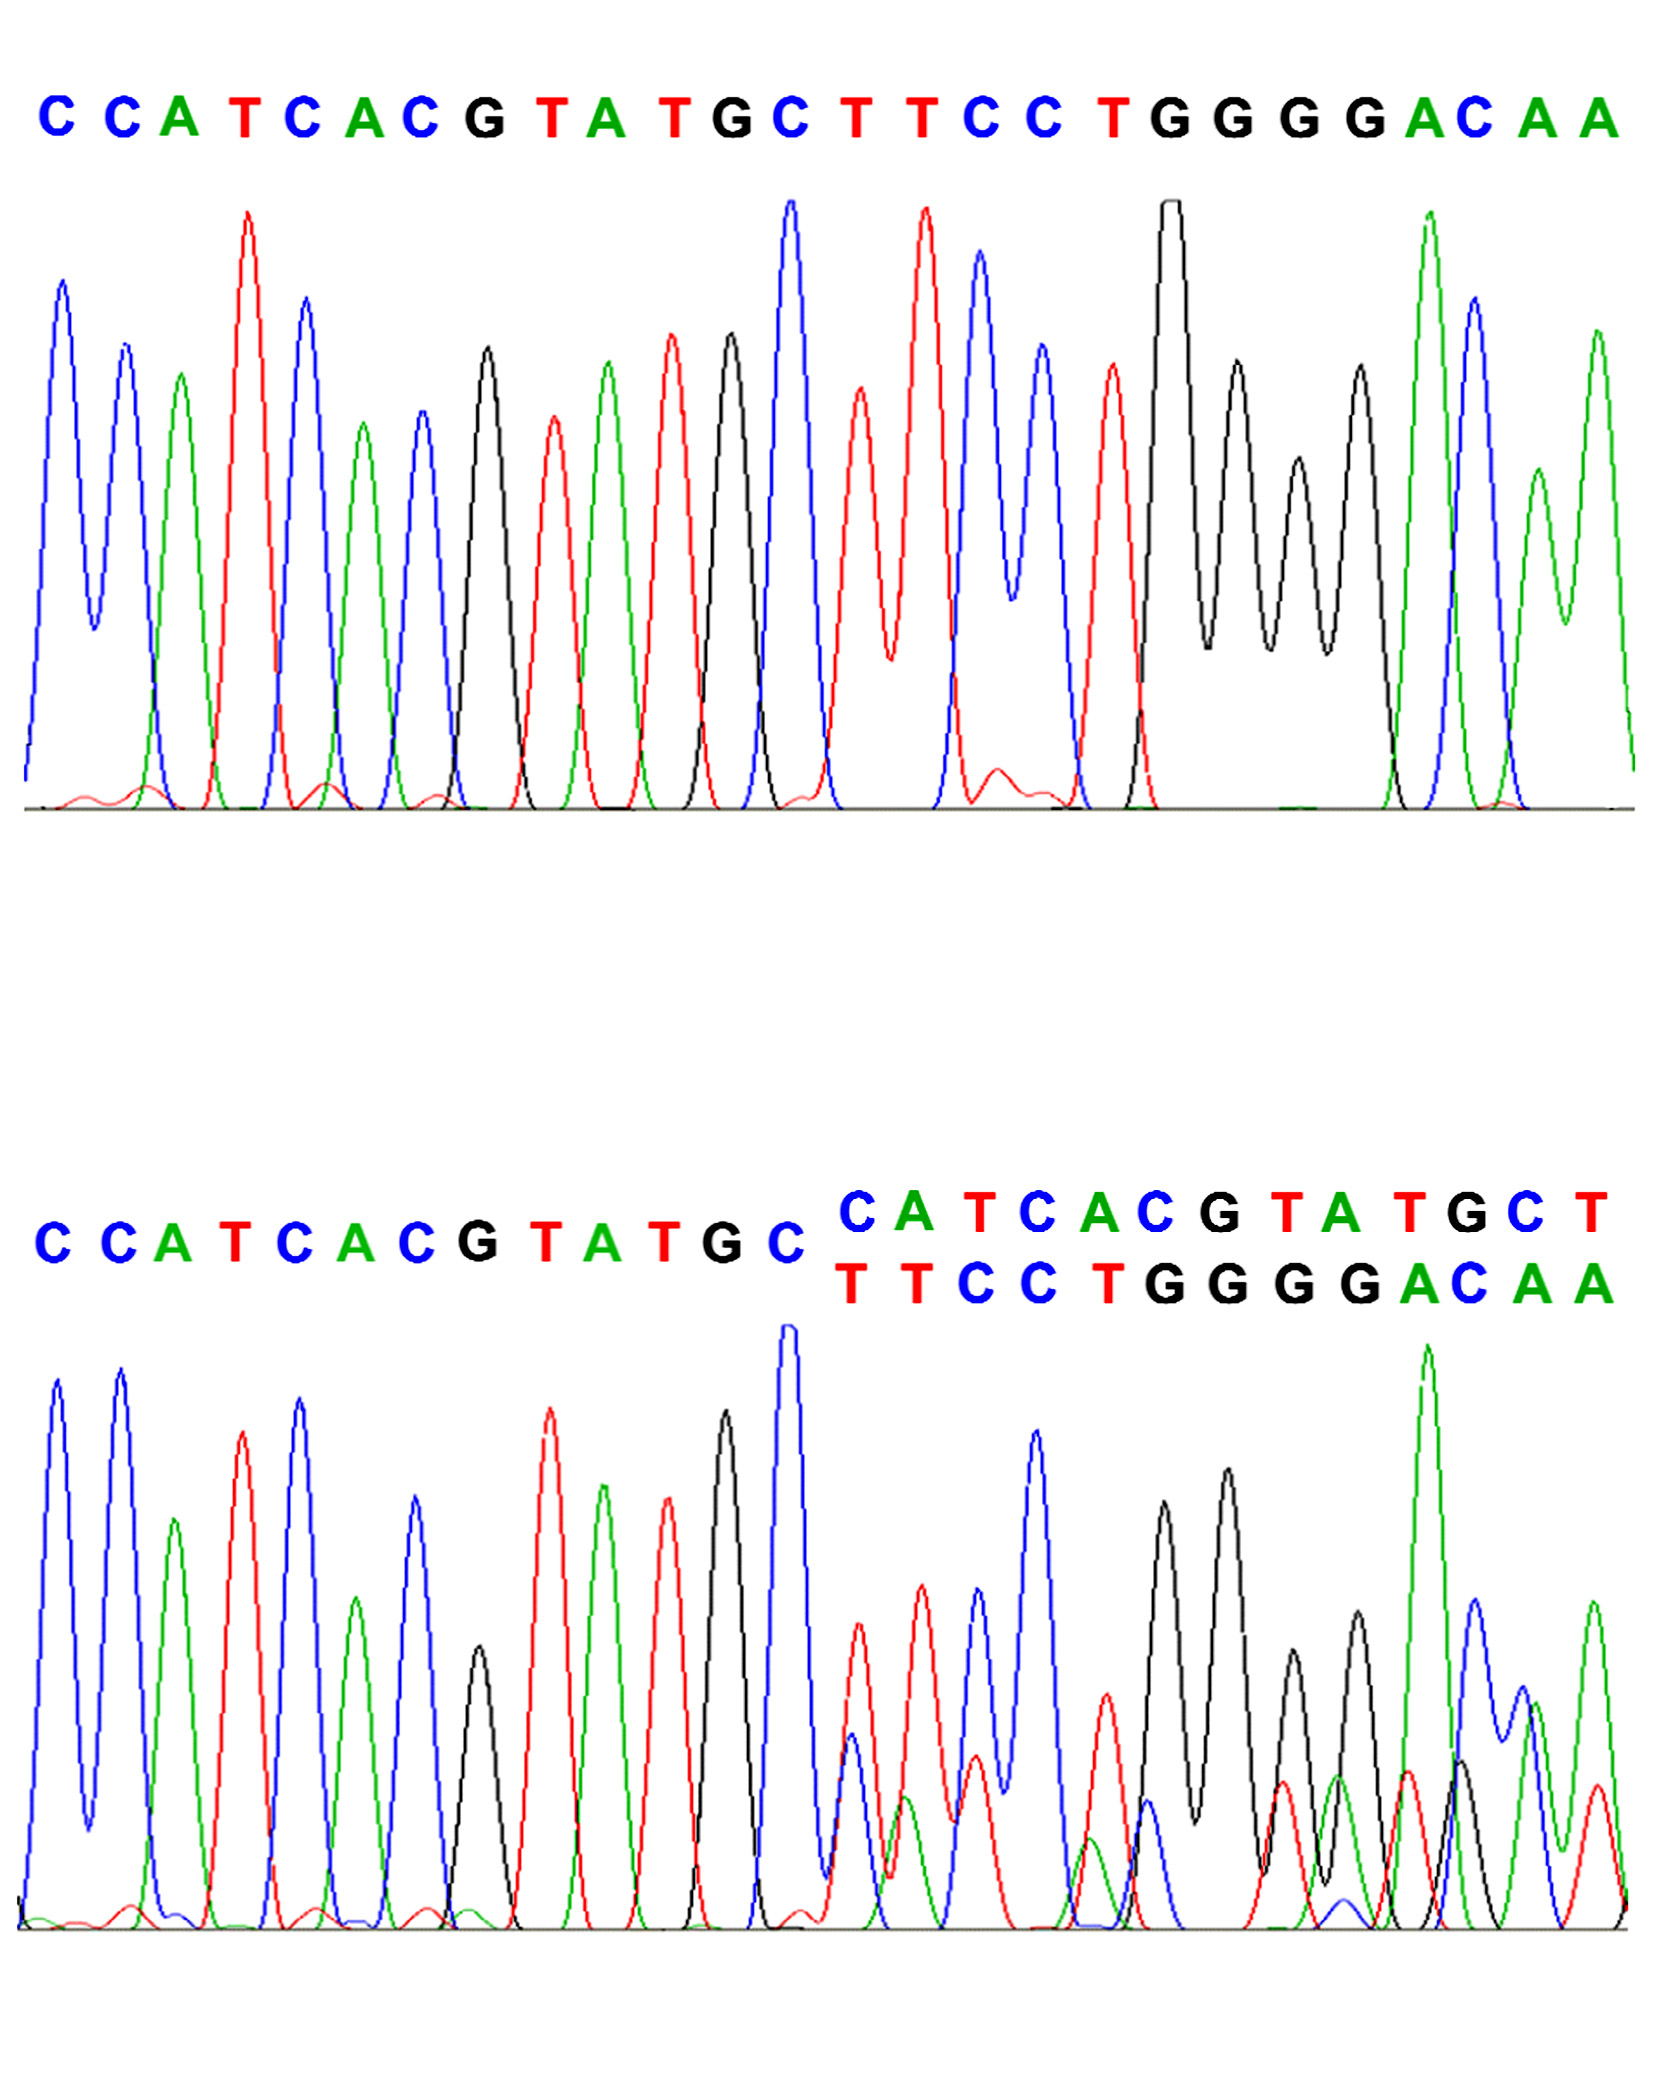 One of the mutation sequences which formed part of the study